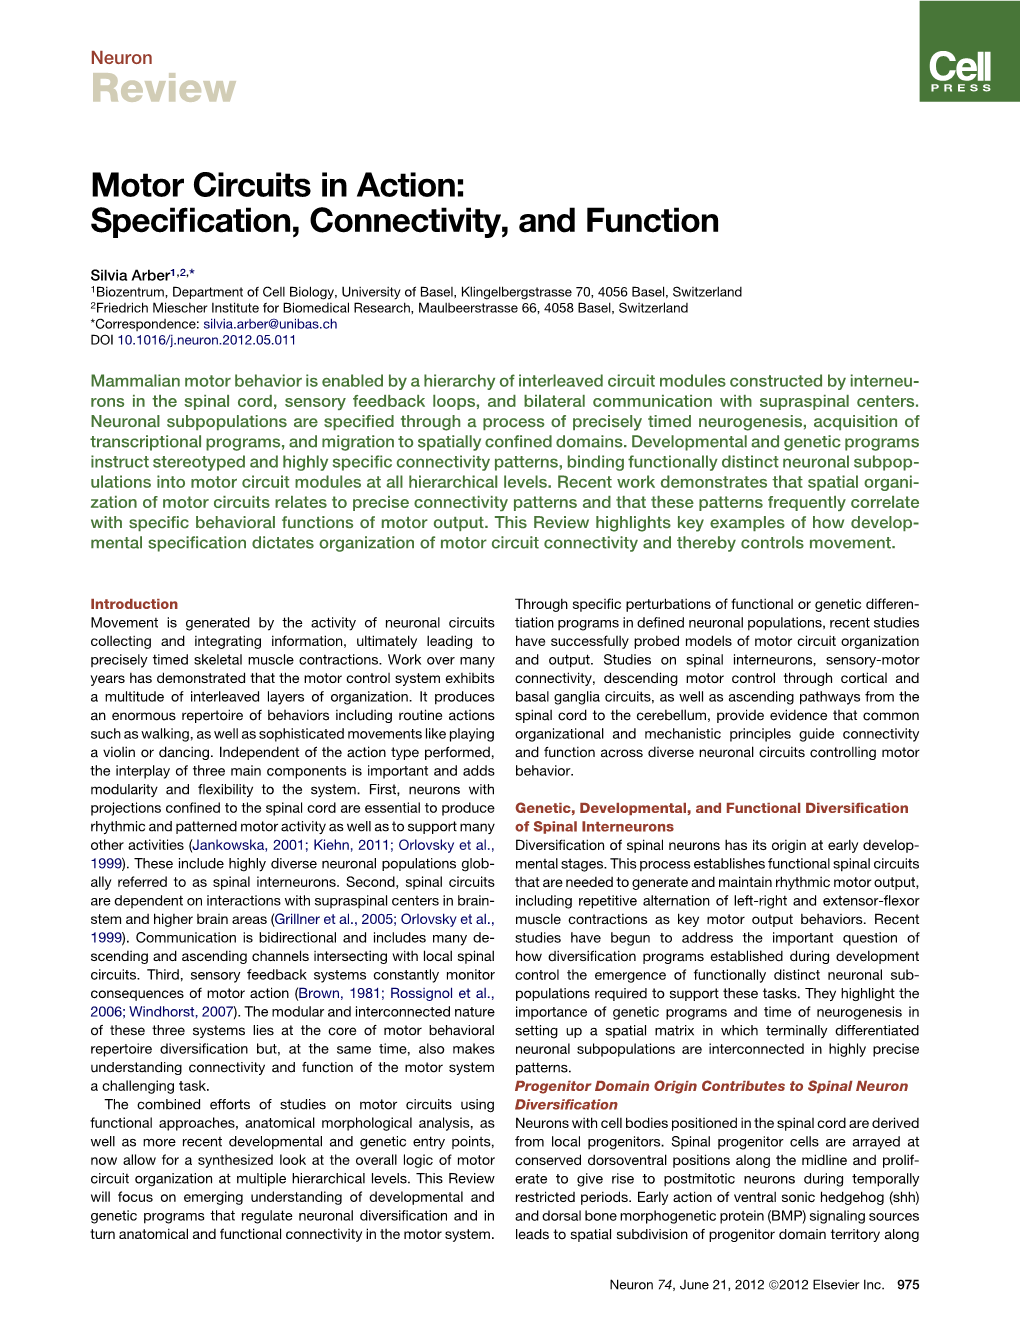 Motor Circuits in Action: Specification, Connectivity, and Function